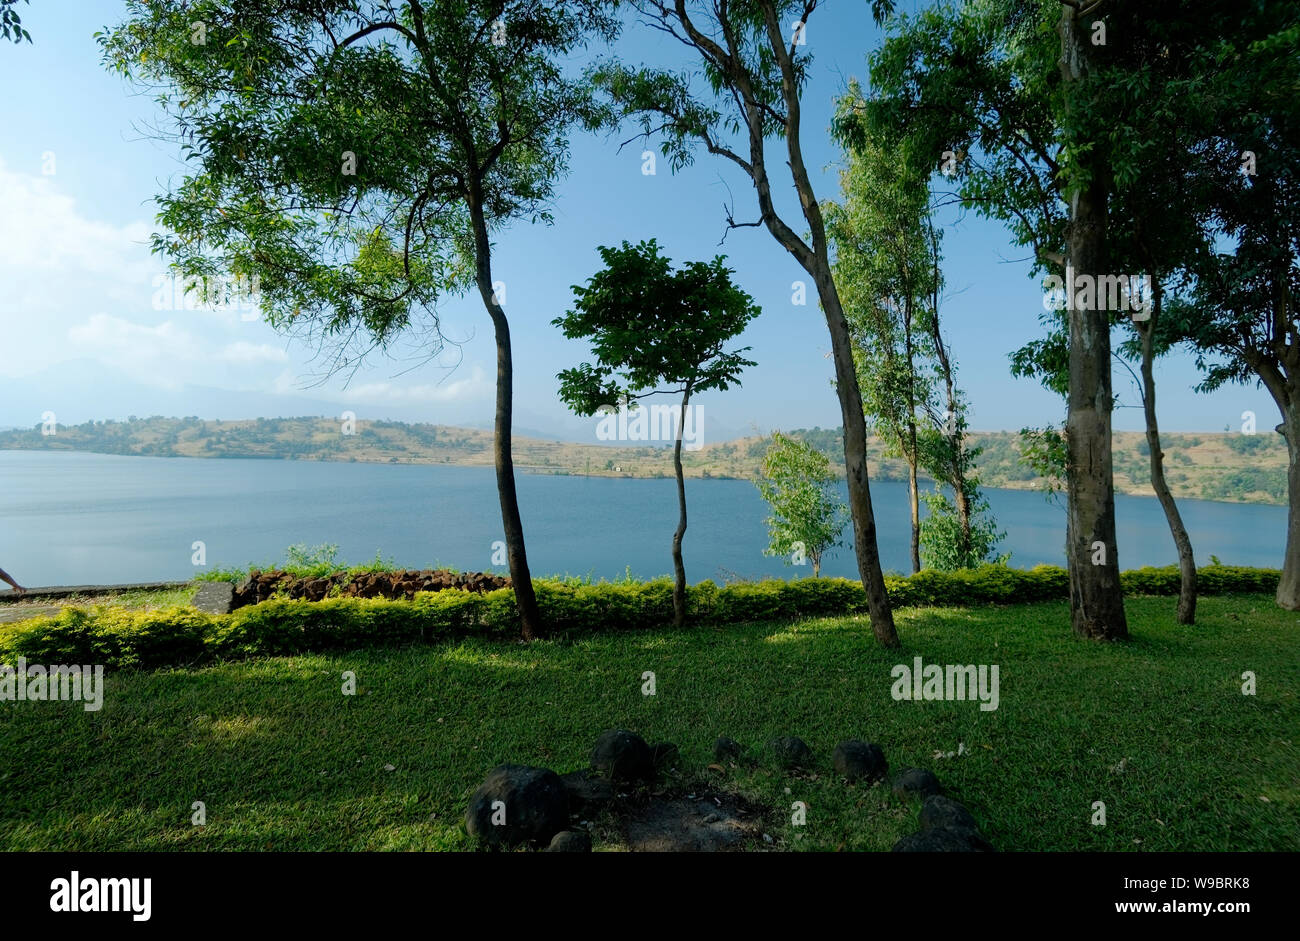 Bhandardara reservoir near Igatpuri, in the western ghats of India. Located in the Tehsil Akole Ahmednagar district Maharashtra, India. Stock Photo